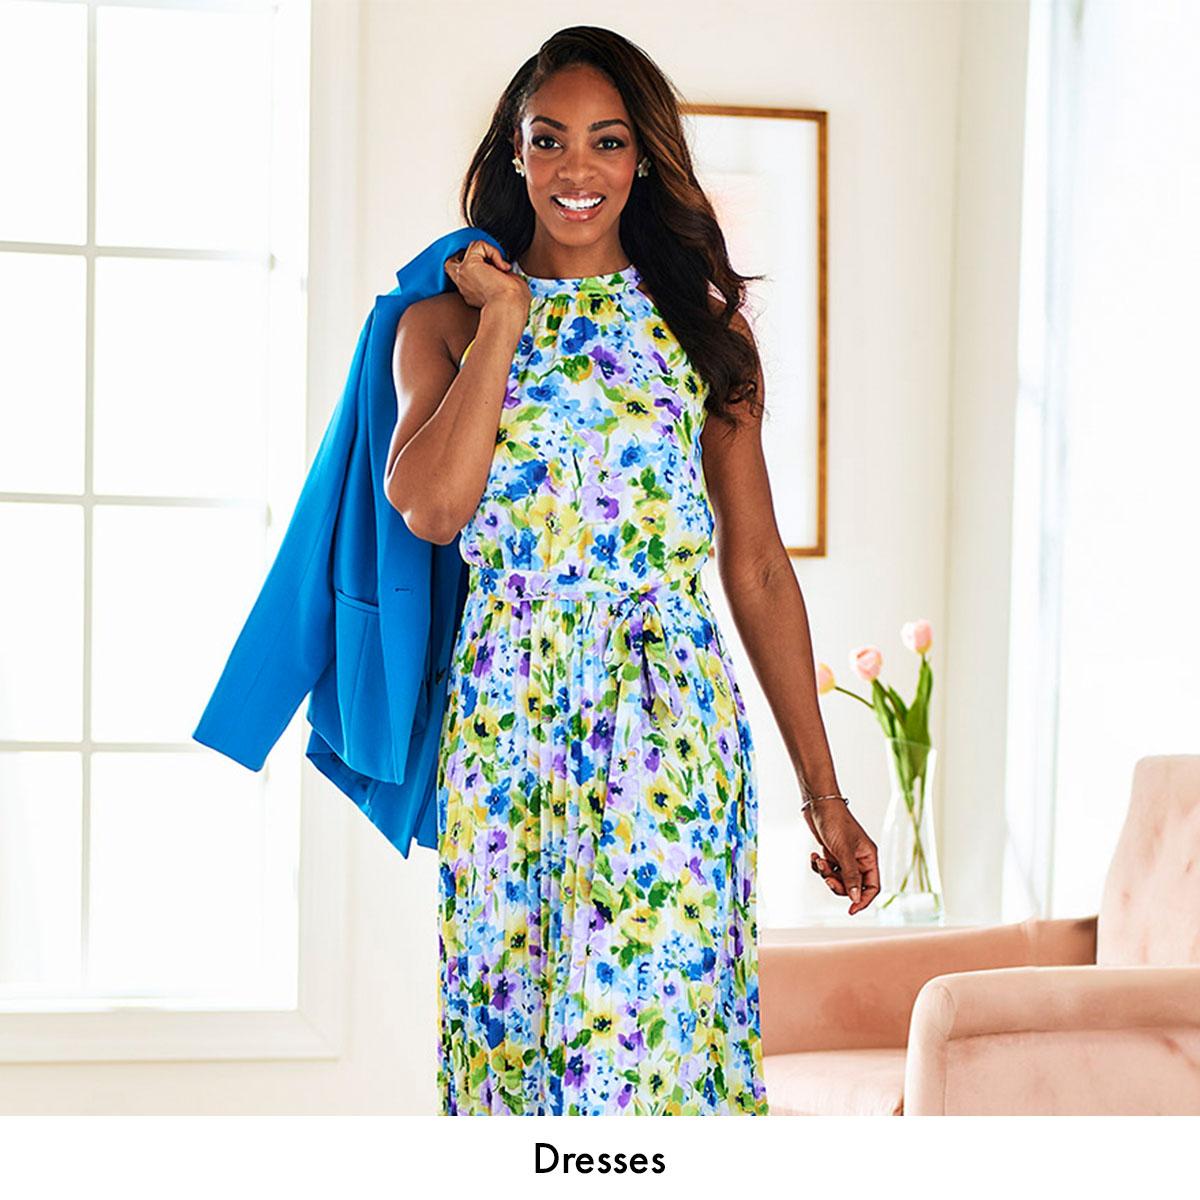 All Women's Clothing: Fashion for All Sizes - Boscov's